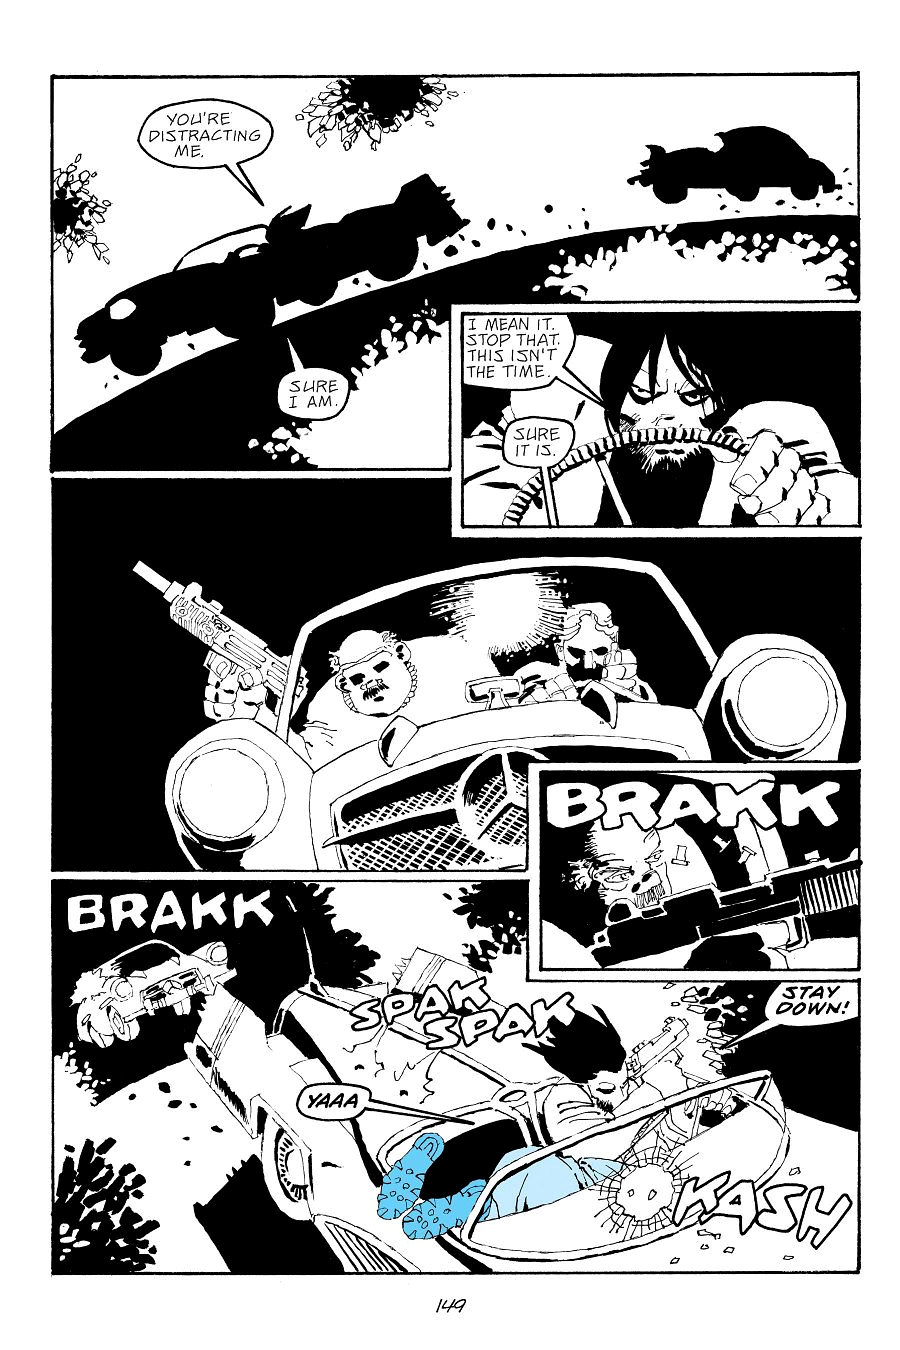 page 149 of sin city 7 hell and back